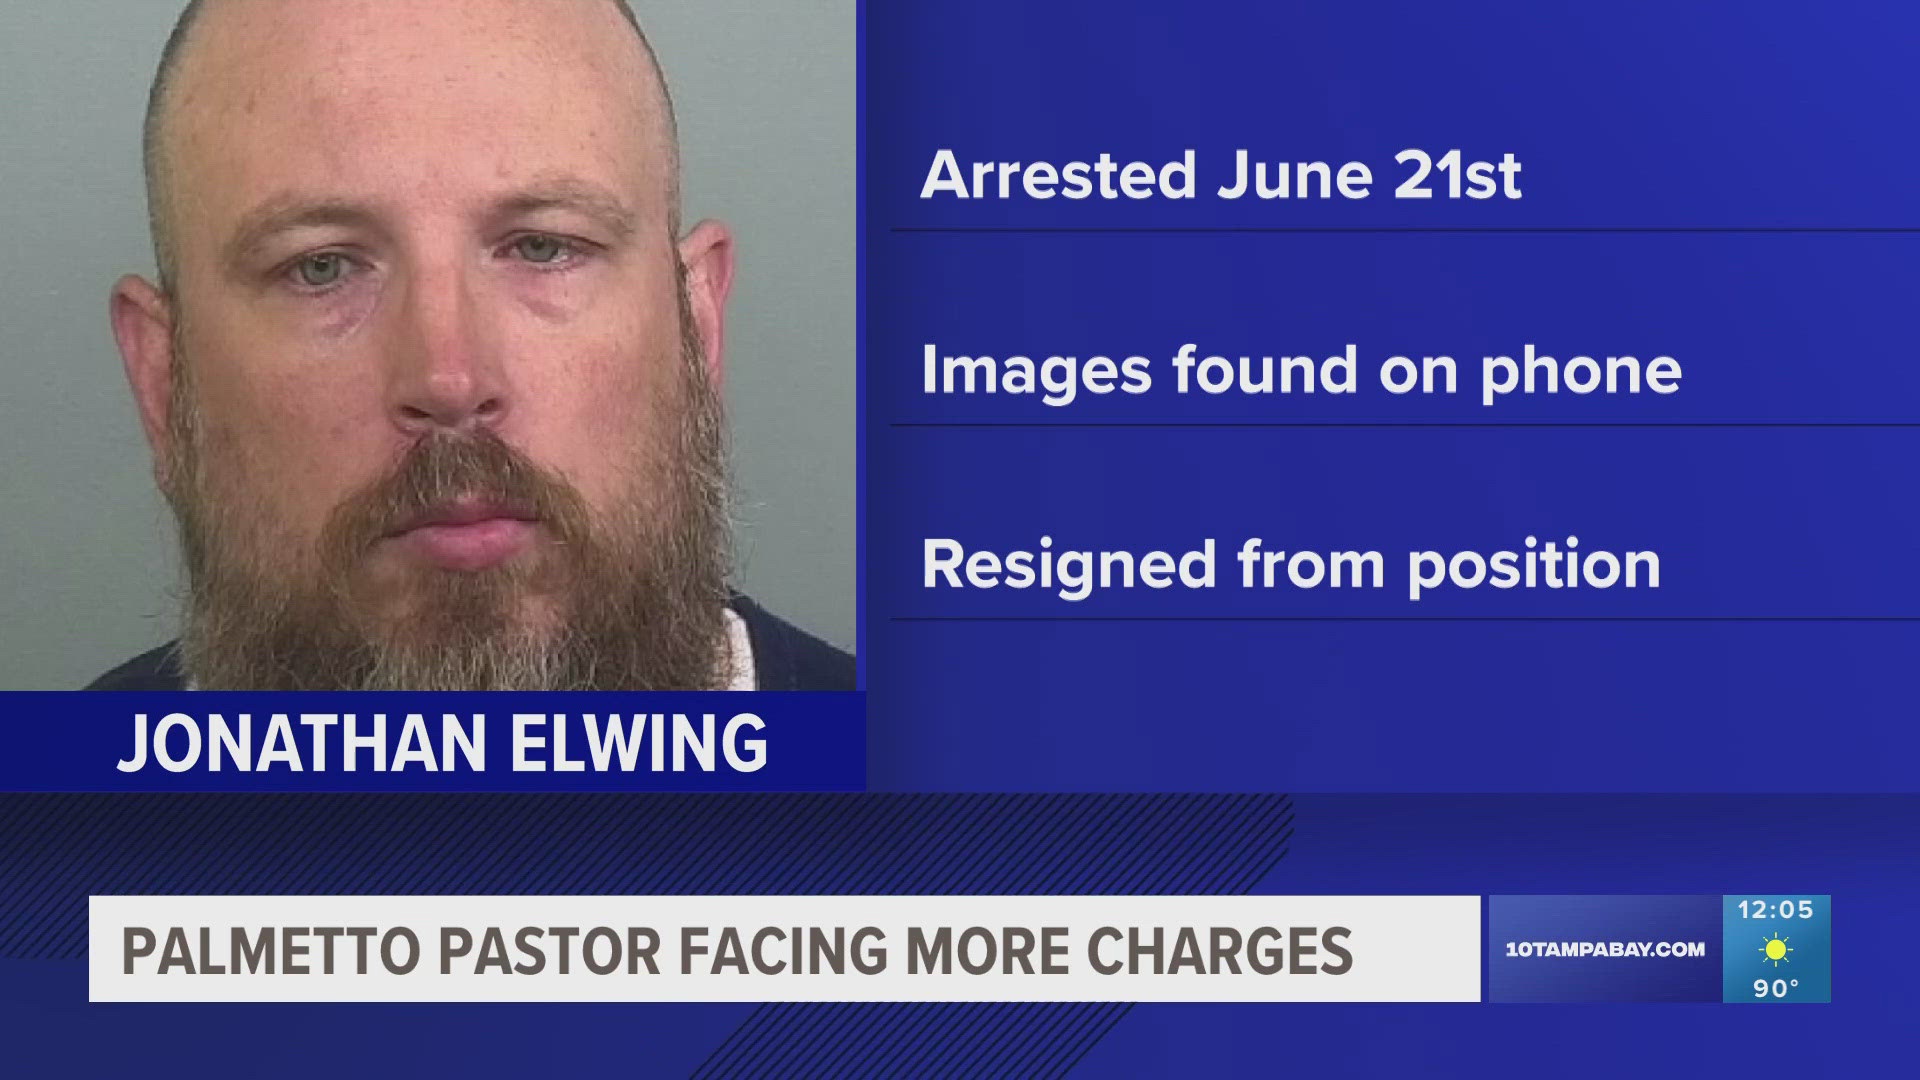 Jonathan Elwing resigned as senior pastor of Palm View First Baptist Church after his arrest.